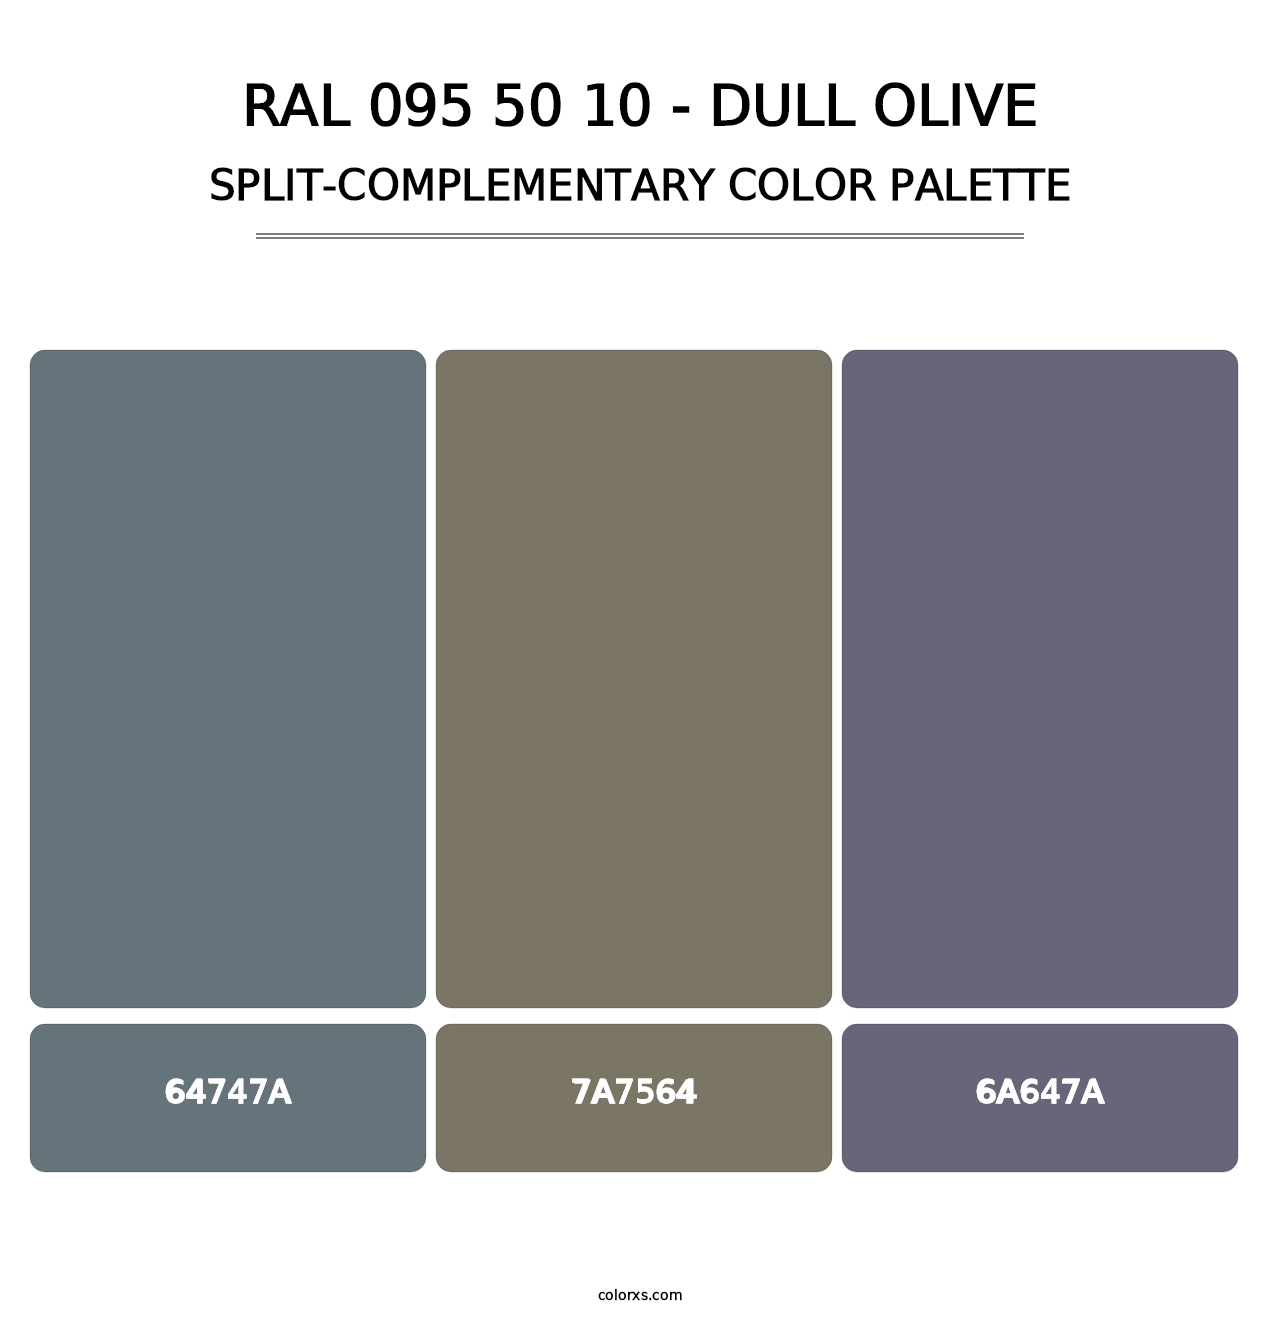 RAL 095 50 10 - Dull Olive - Split-Complementary Color Palette